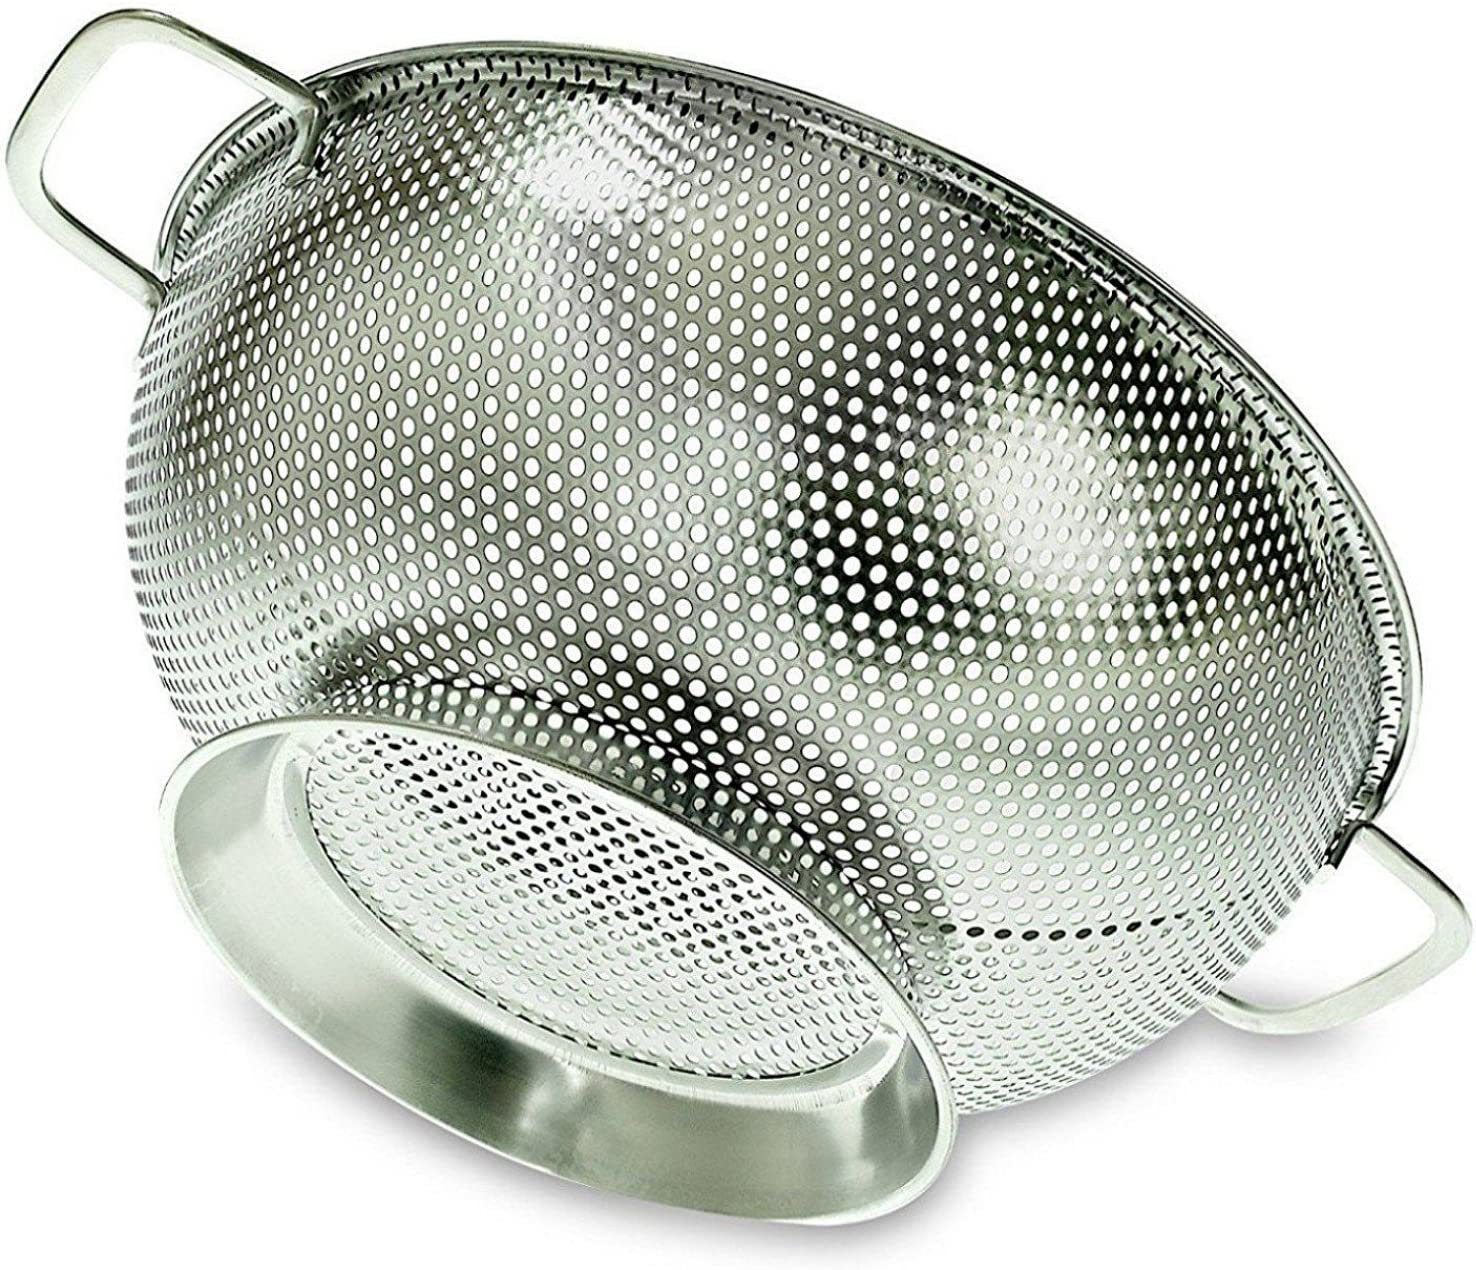 KitchenAid Expandable Stainless Steel Colander, One size, Black